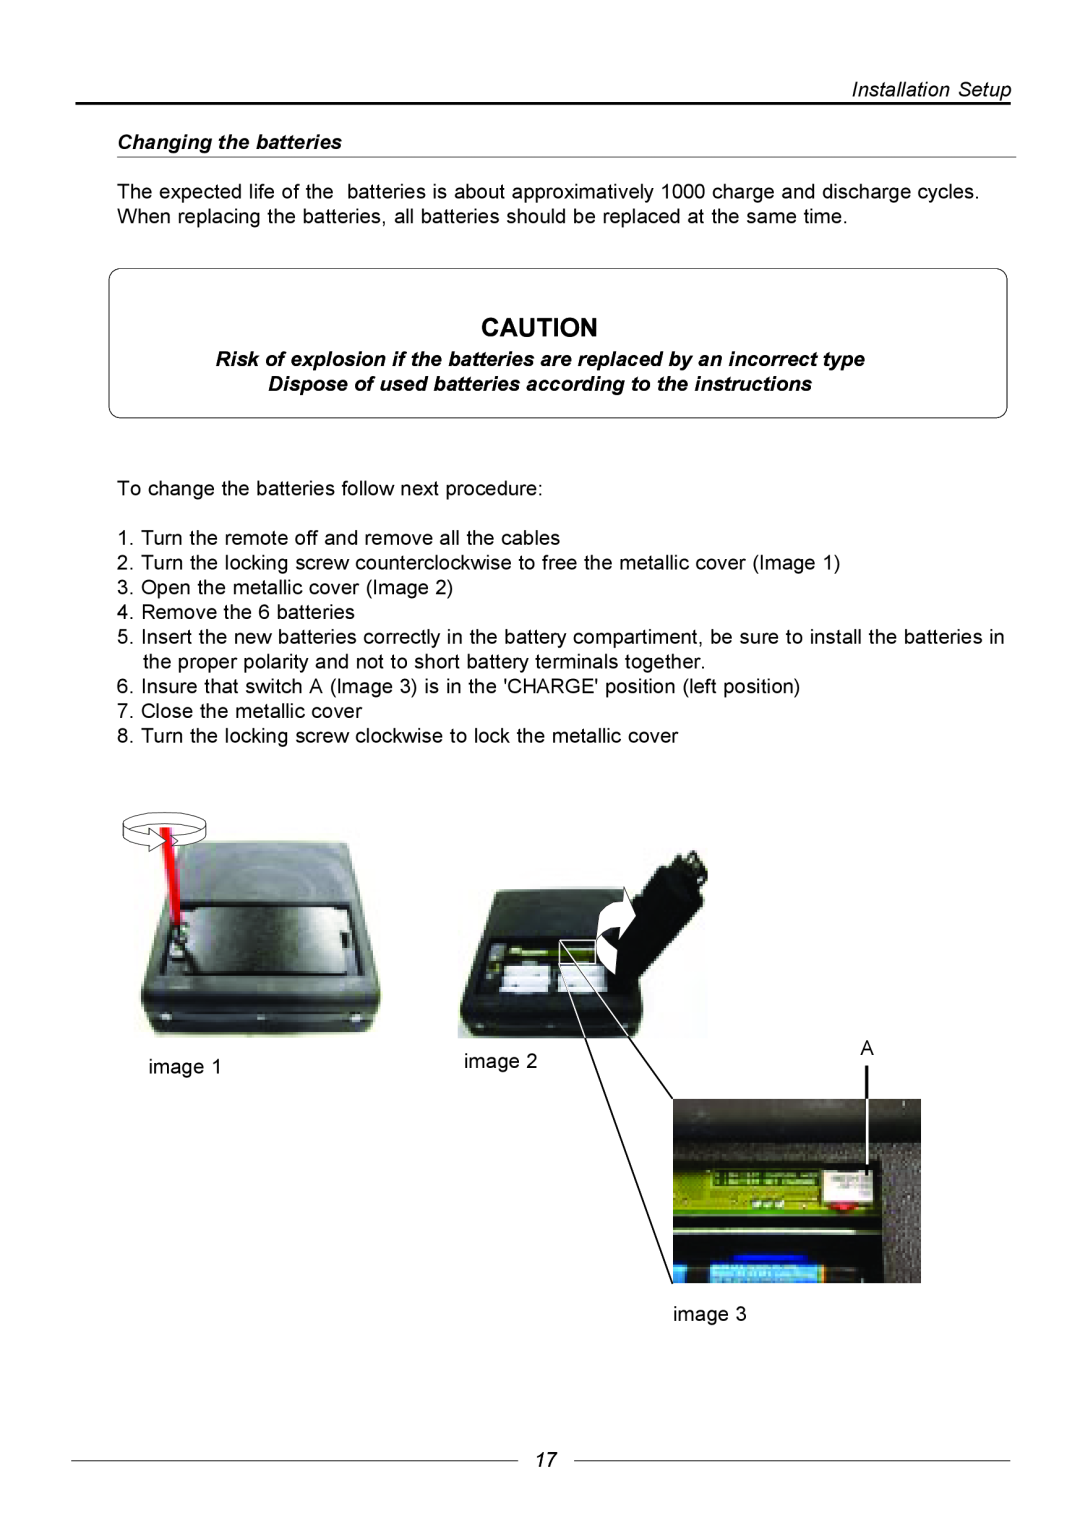 Barco R9840176 manual Installation Setup Changing the batteries, Dispose of used batteries according to the instructions 